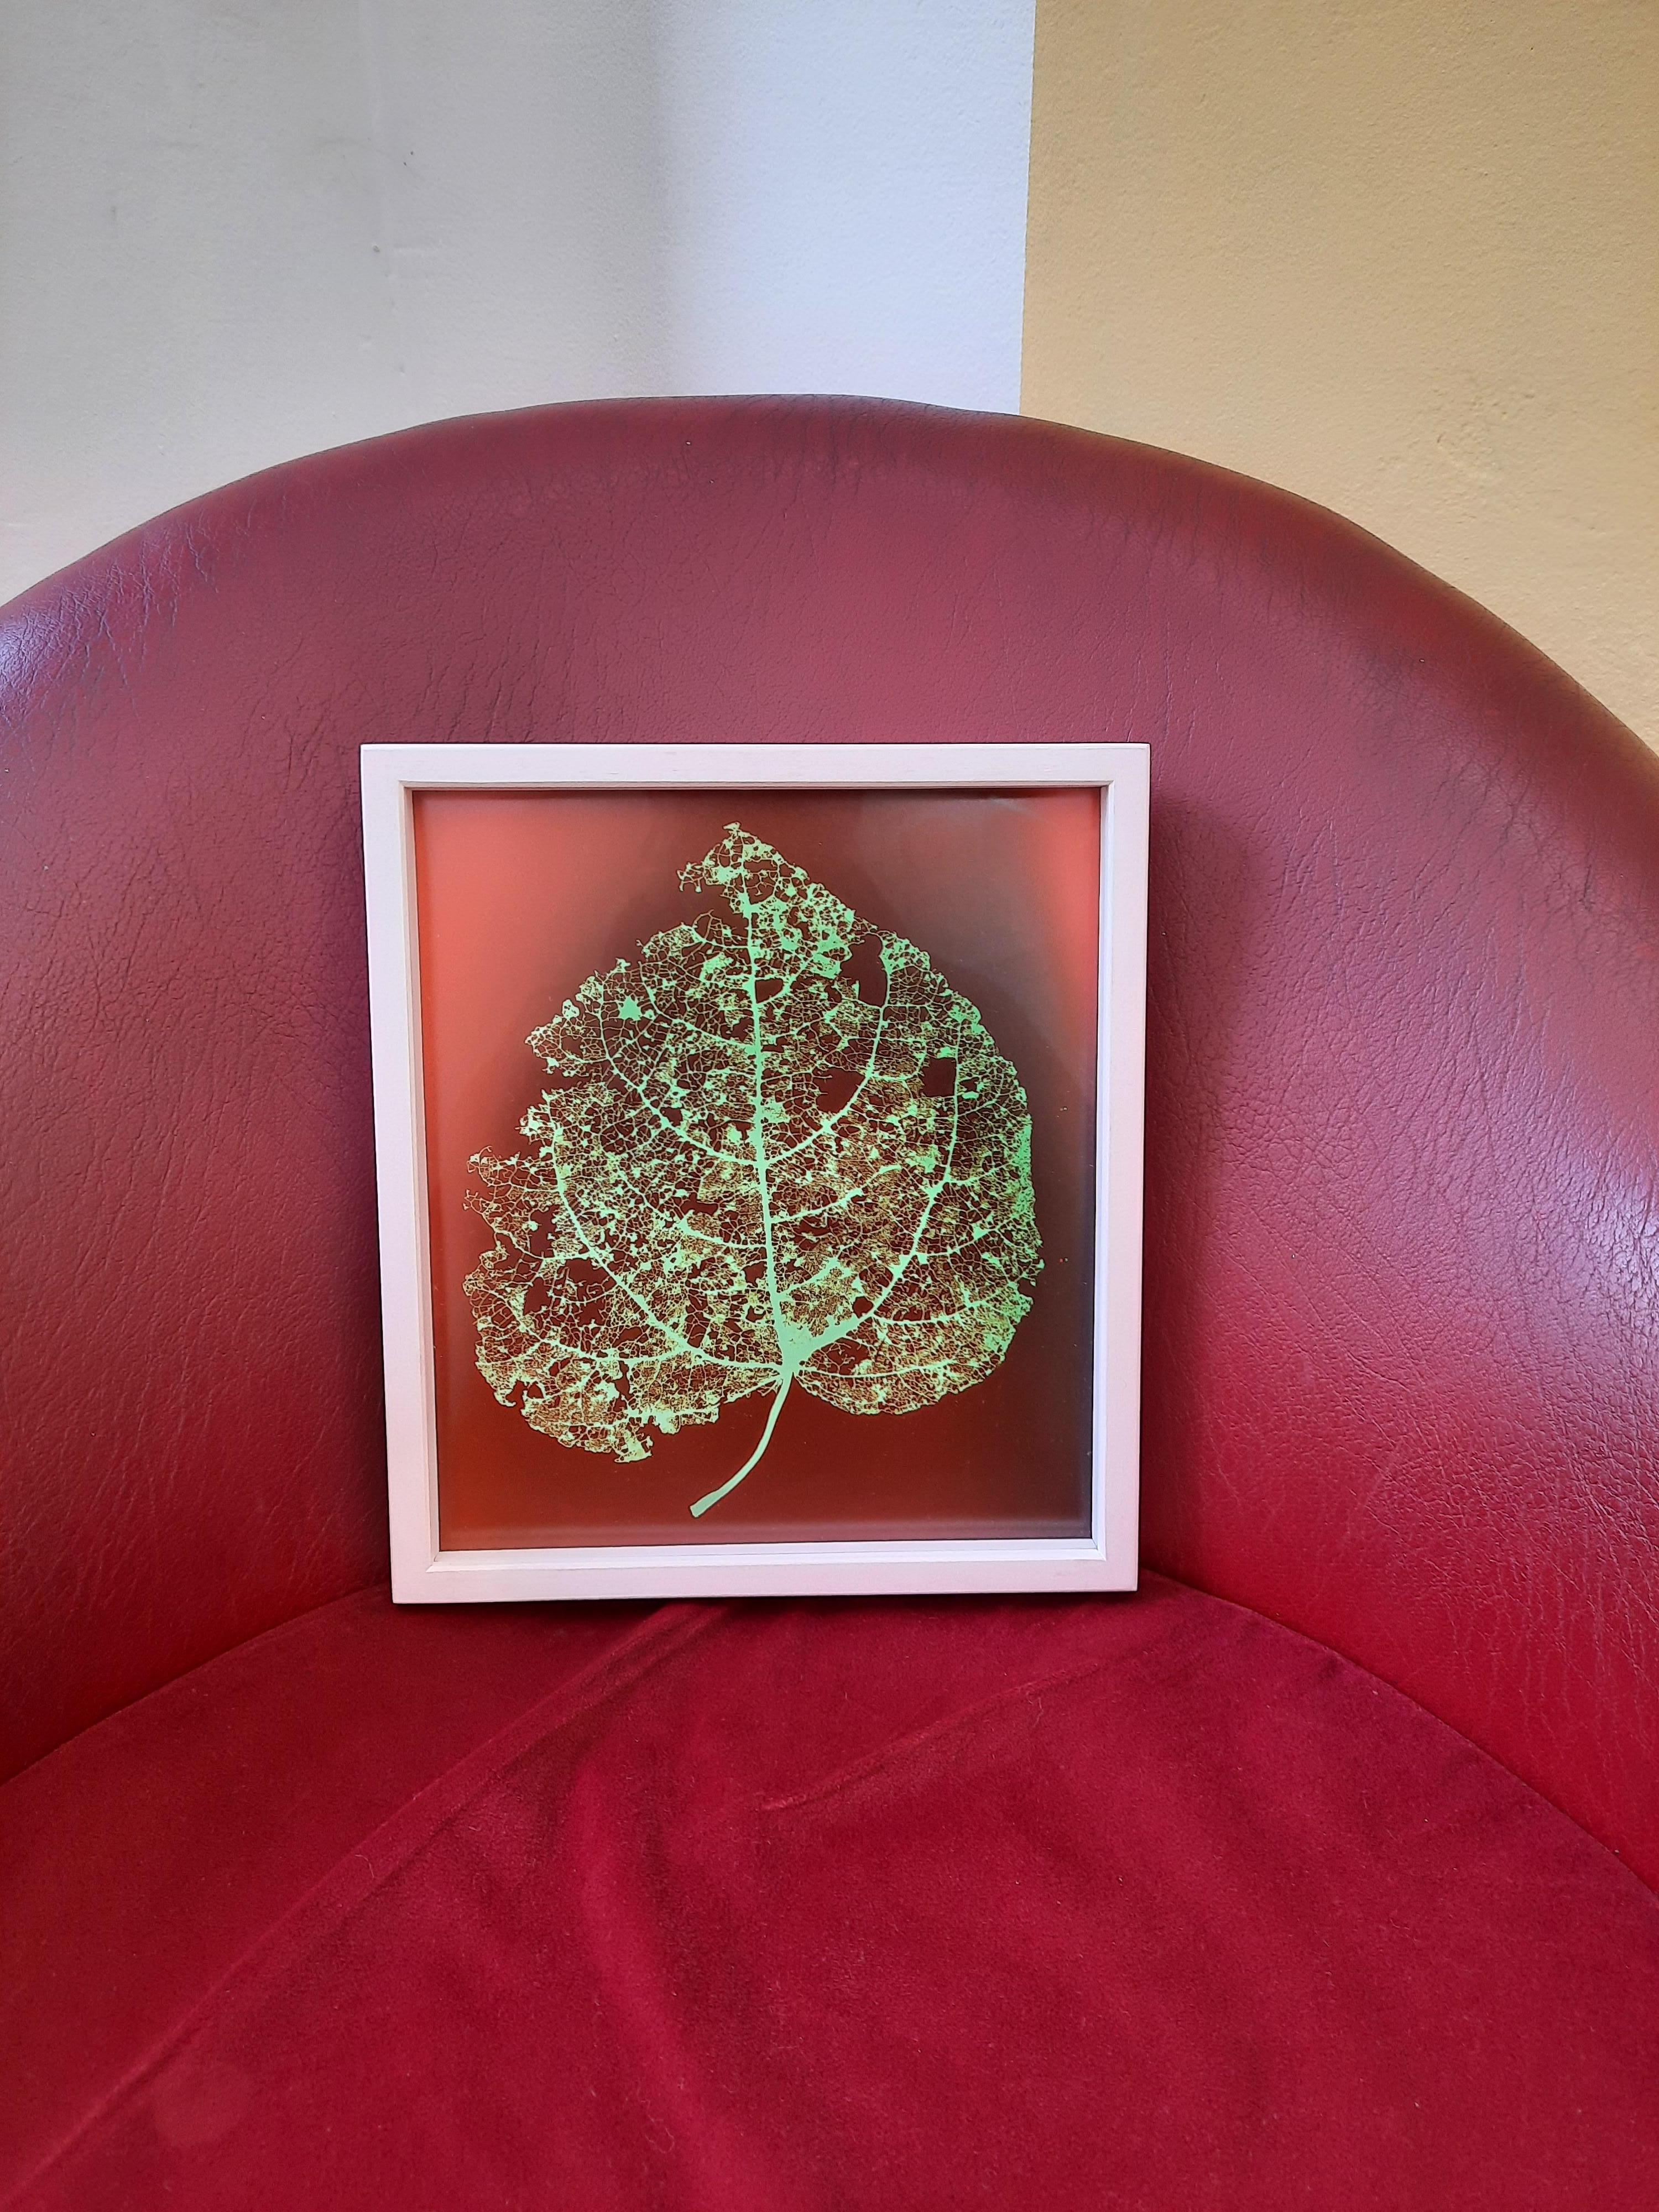 Trees (Nr. 20/4) - Red and Green Leaf Photogram
2022
Photogram, framed
25 x 22 cm
Unique copy, signed

The photogram series “Trees” by Regina Hügli focuses on the phenomenon of ramification, in other words, the way a tree limb forks into two